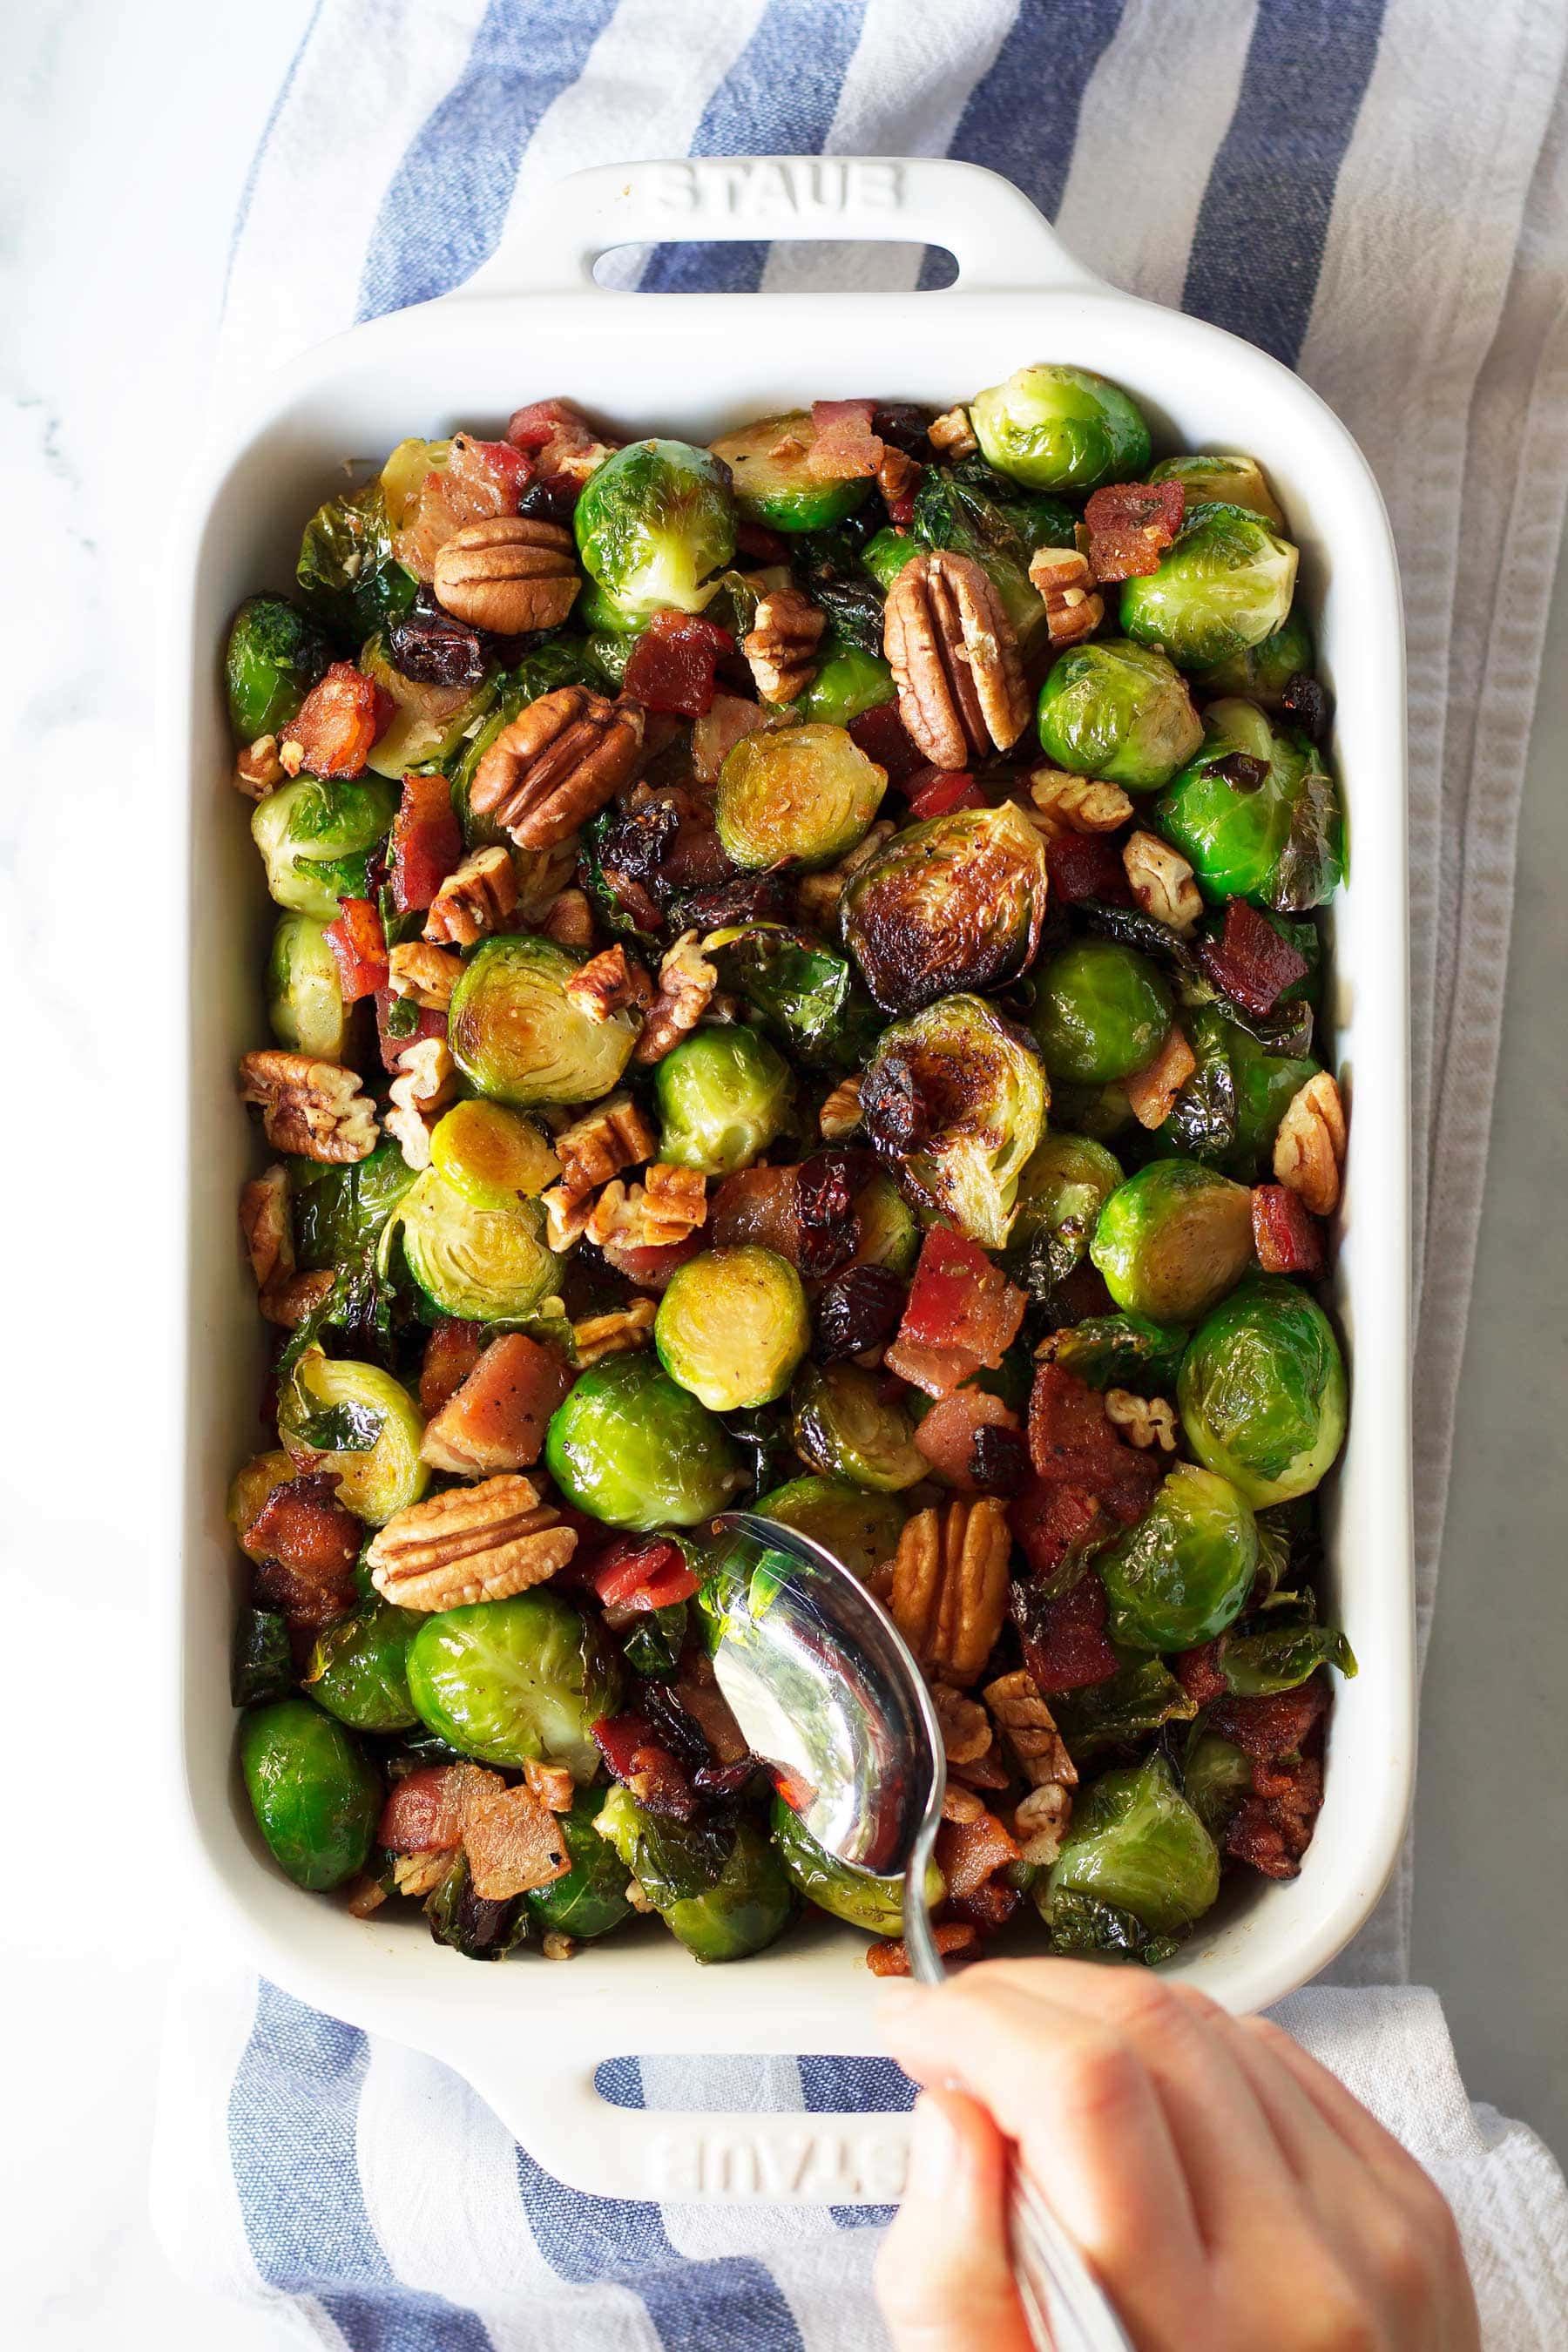 This quick holiday side dish is perfect for Thanksgiving and Christmas! These Maple Bacon Brussels Sprouts with Pecans and Cranberries are sure to be a hit on your holiday table. This paleo Thanksgiving recipe is also gluten free, dairy free, and can be made low carb and keto! #thanksgivingsidedish #healthythanksgiving #healthychristmas #brusselssprouts #bacon #maplesyrup #lakanto #cranberries #crasins #pecans #glutenfreethanksgiving #glutenfree #dairyfree #ketothanksgiving #ketochristmas #ketosidedish